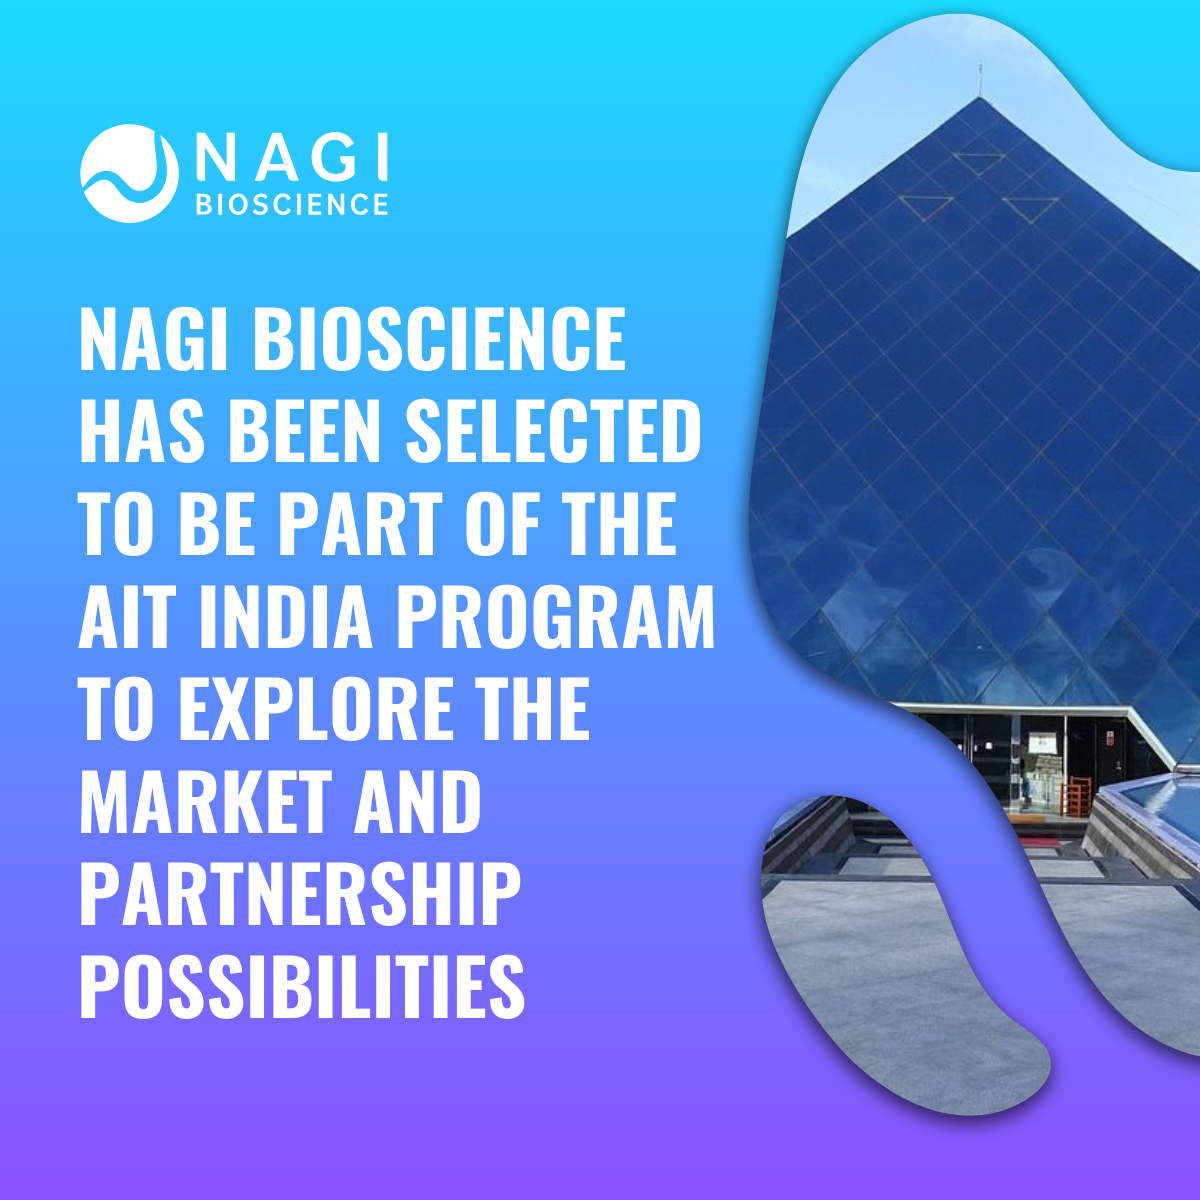 Nagi Bioscience has been selected to be part of the AIT India Program to explore the market and partnership possibilities